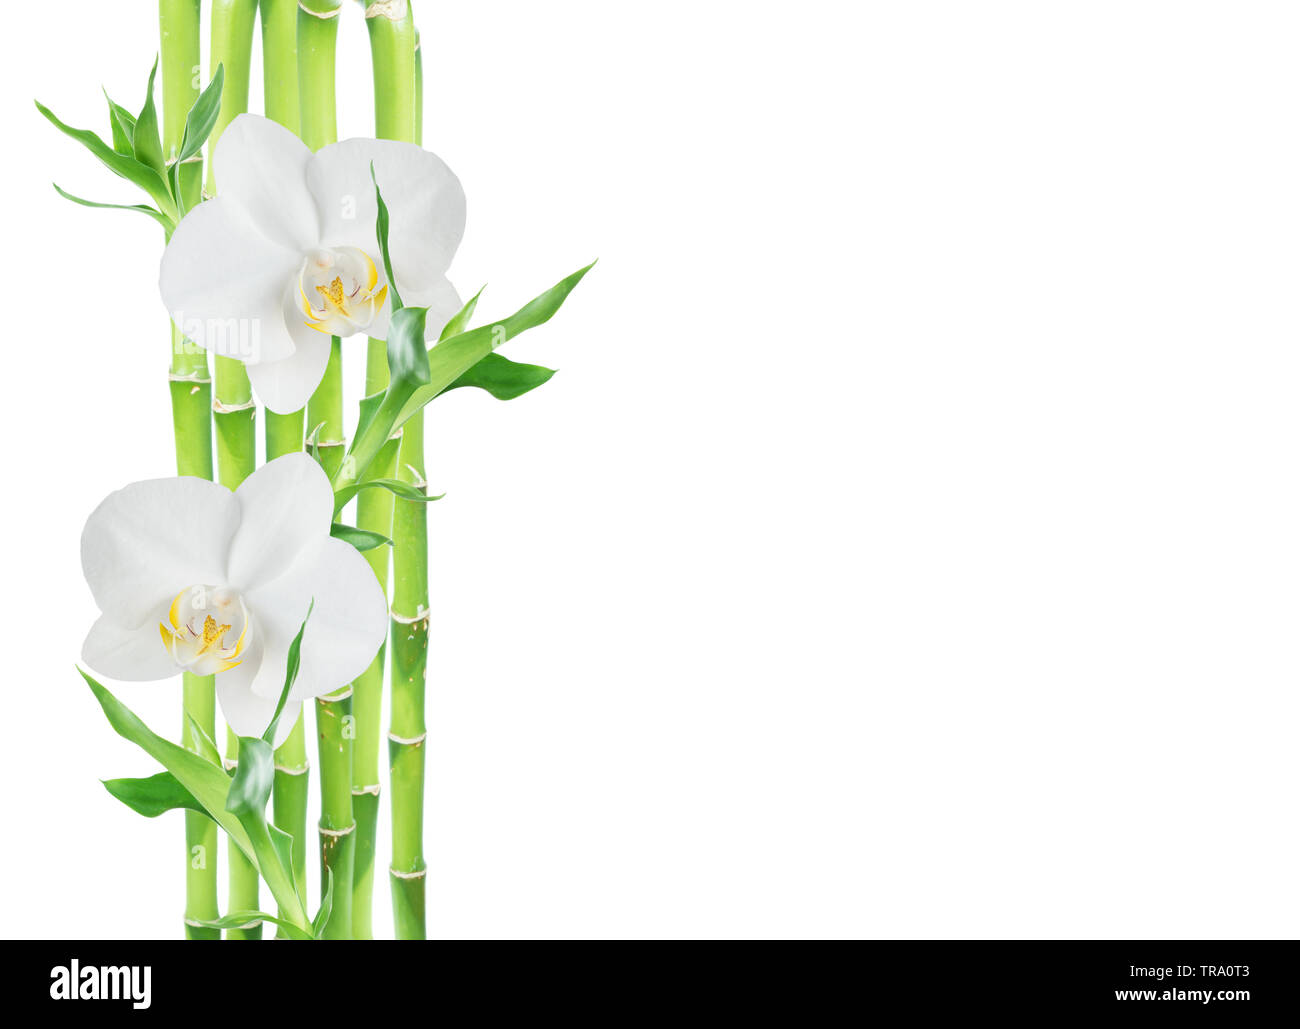 Several stems of Lucky Bamboo (Dracaena Sanderiana) with green leaves and two white orchid flowers, isolated on white background, with copy-space Stock Photo